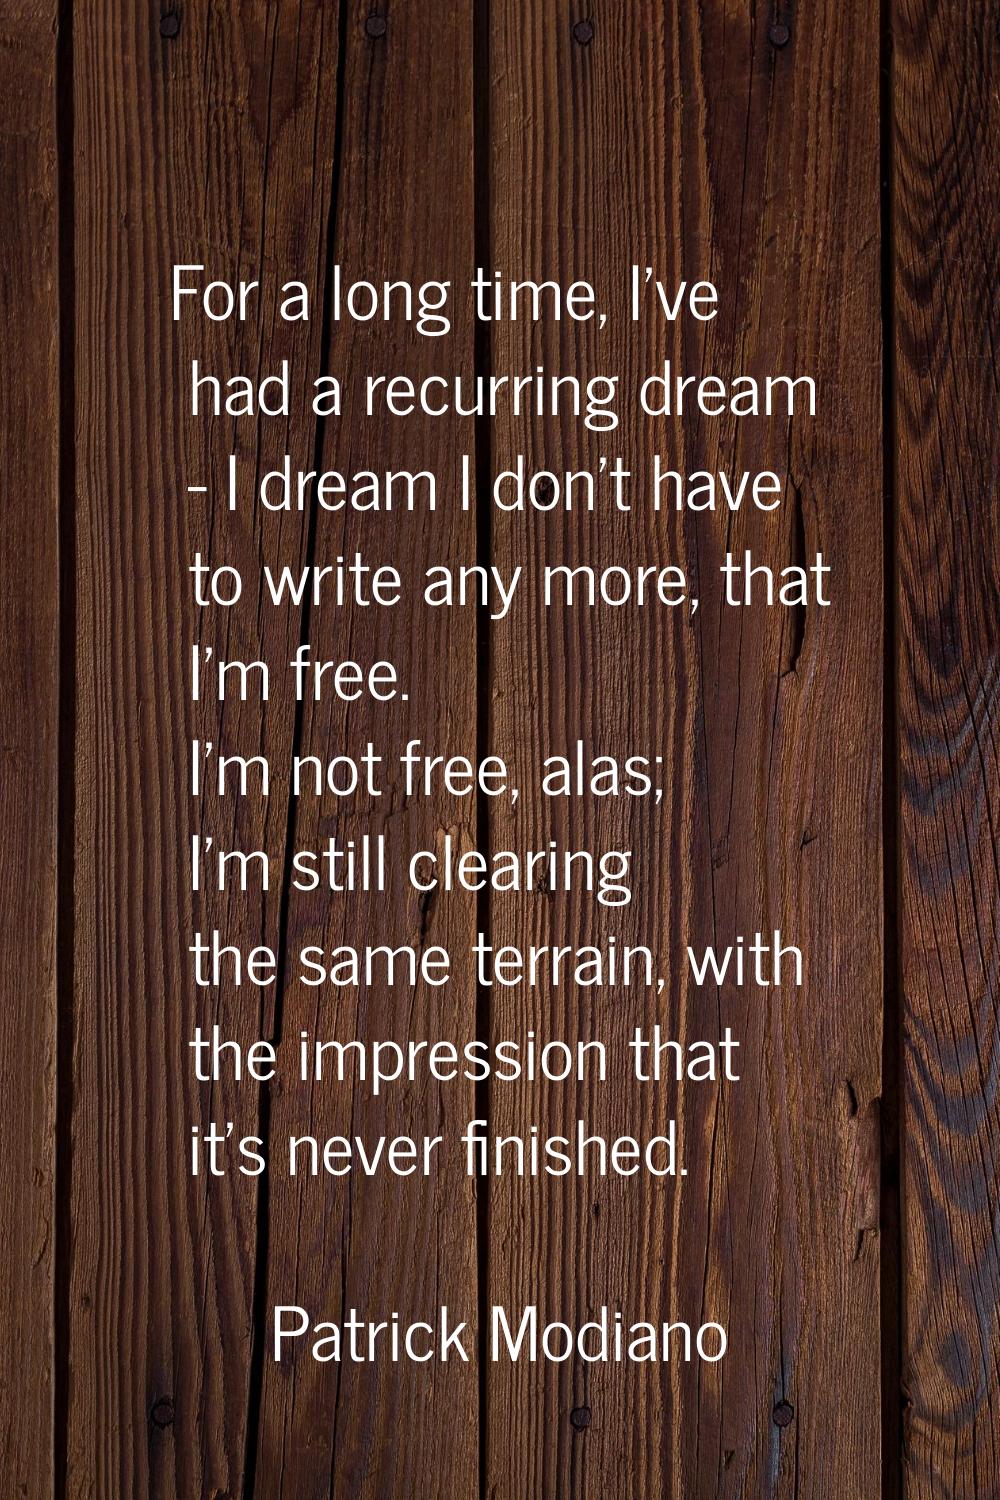 For a long time, I've had a recurring dream - I dream I don't have to write any more, that I'm free